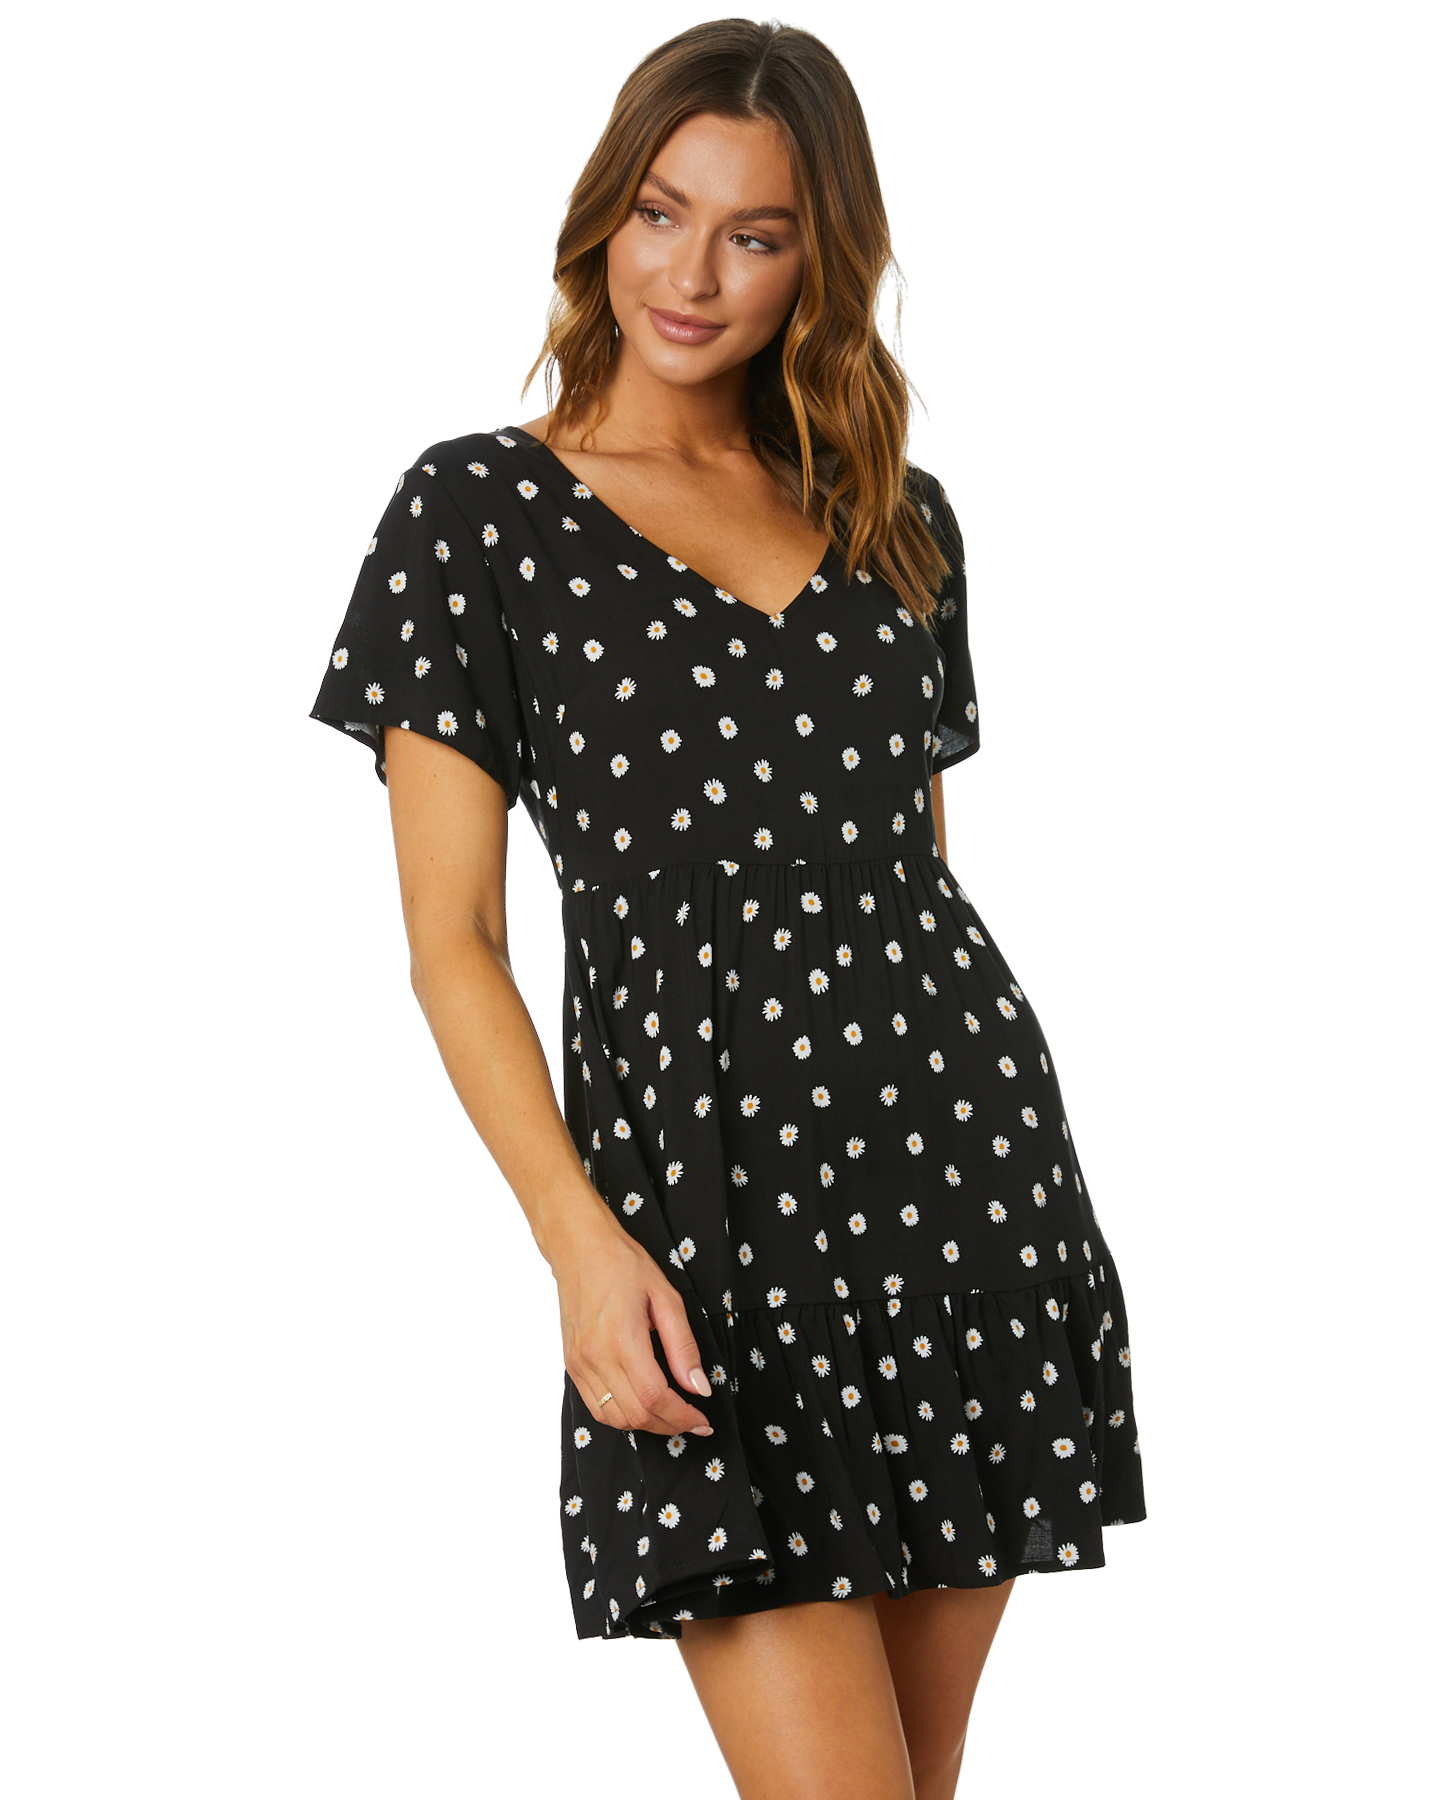 All About Eve Daisy Days Dress - Print | SurfStitch